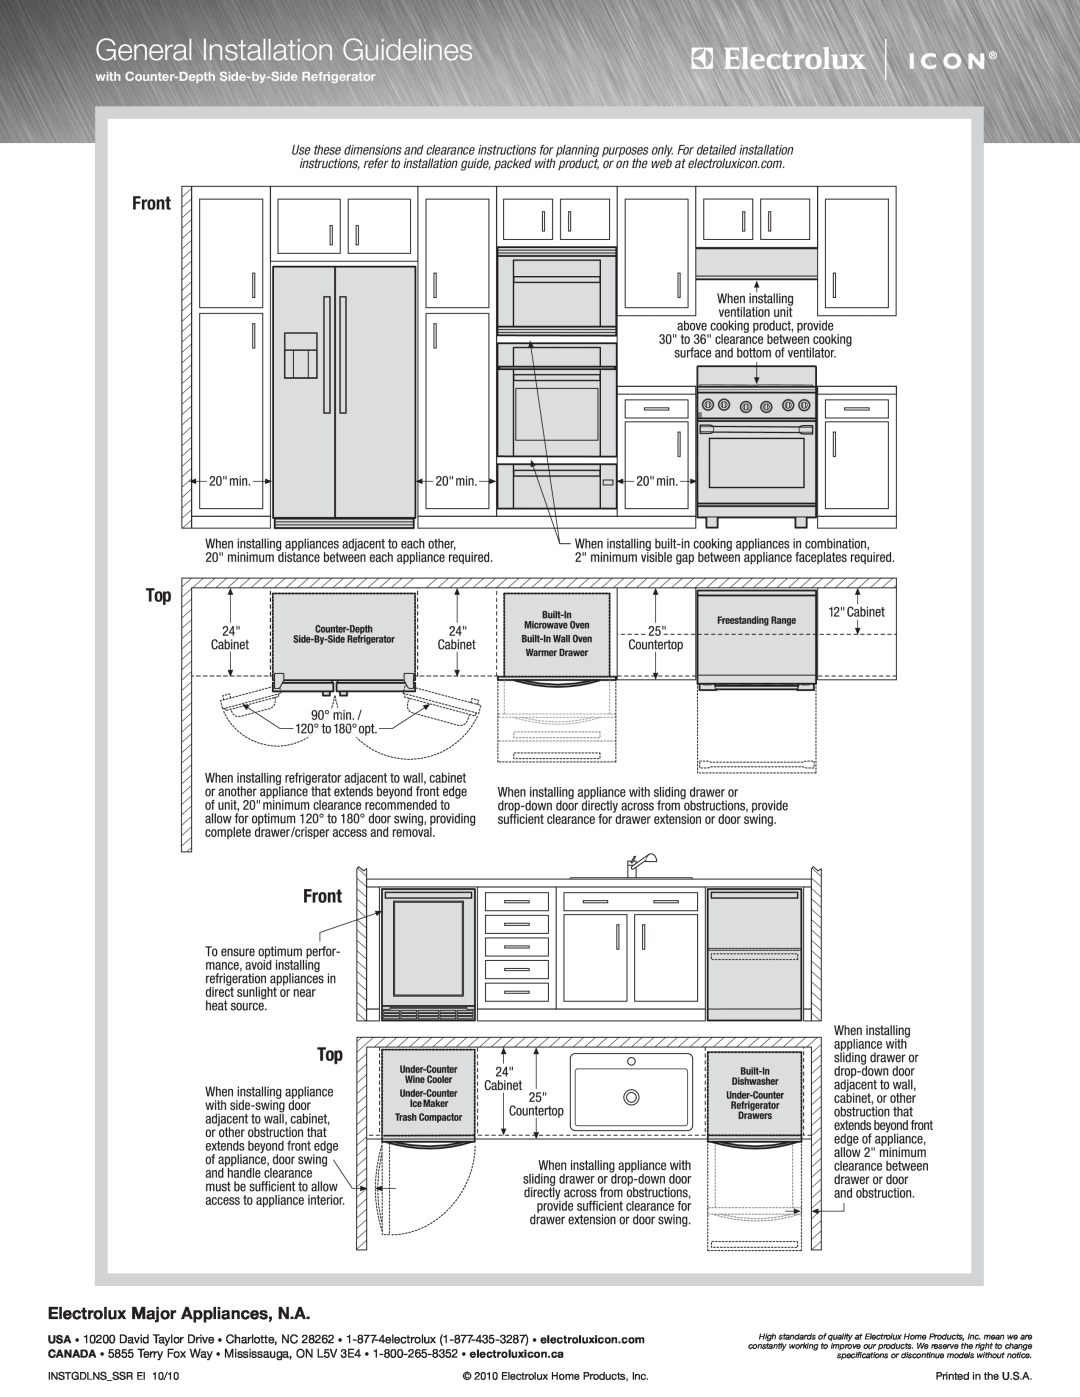 Electrolux EDW7505HPS specifications with Counter-Depth Side-by-Side Refrigerator, General Installation Guidelines, Front 